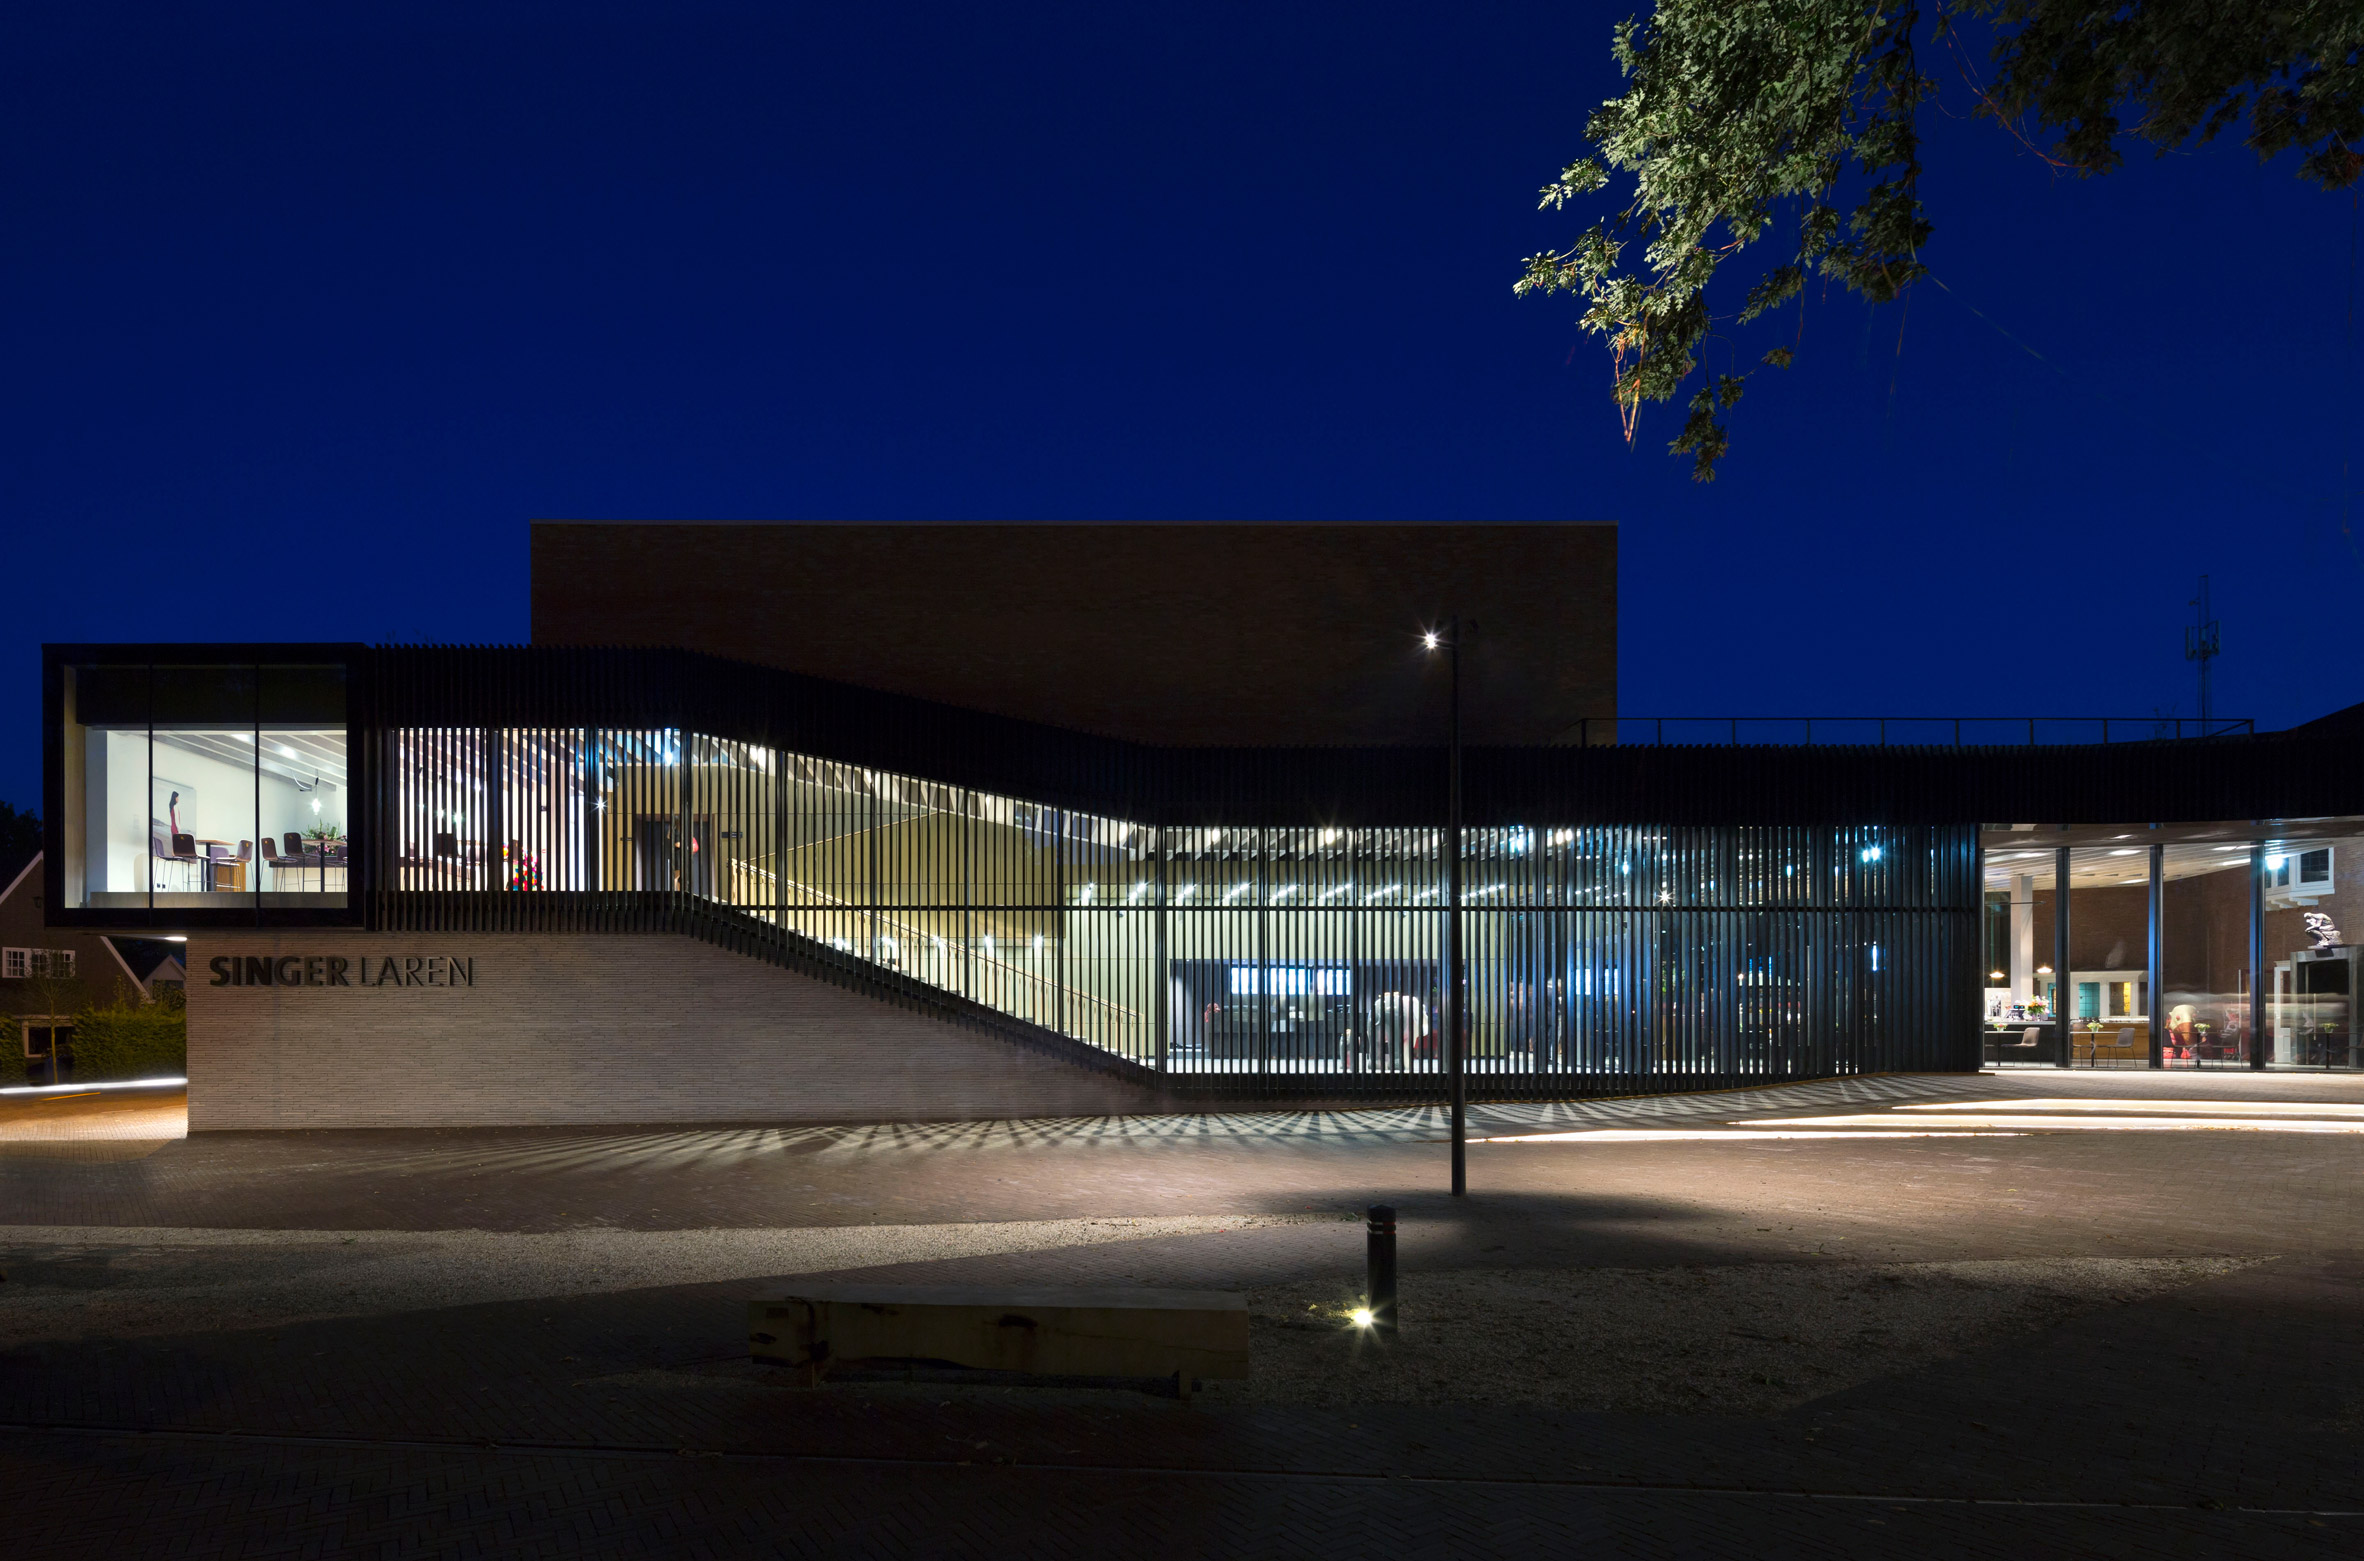 Amsterdam studio KRFT has updated and extended a museum and cultural complex in the Dutch town of Laren